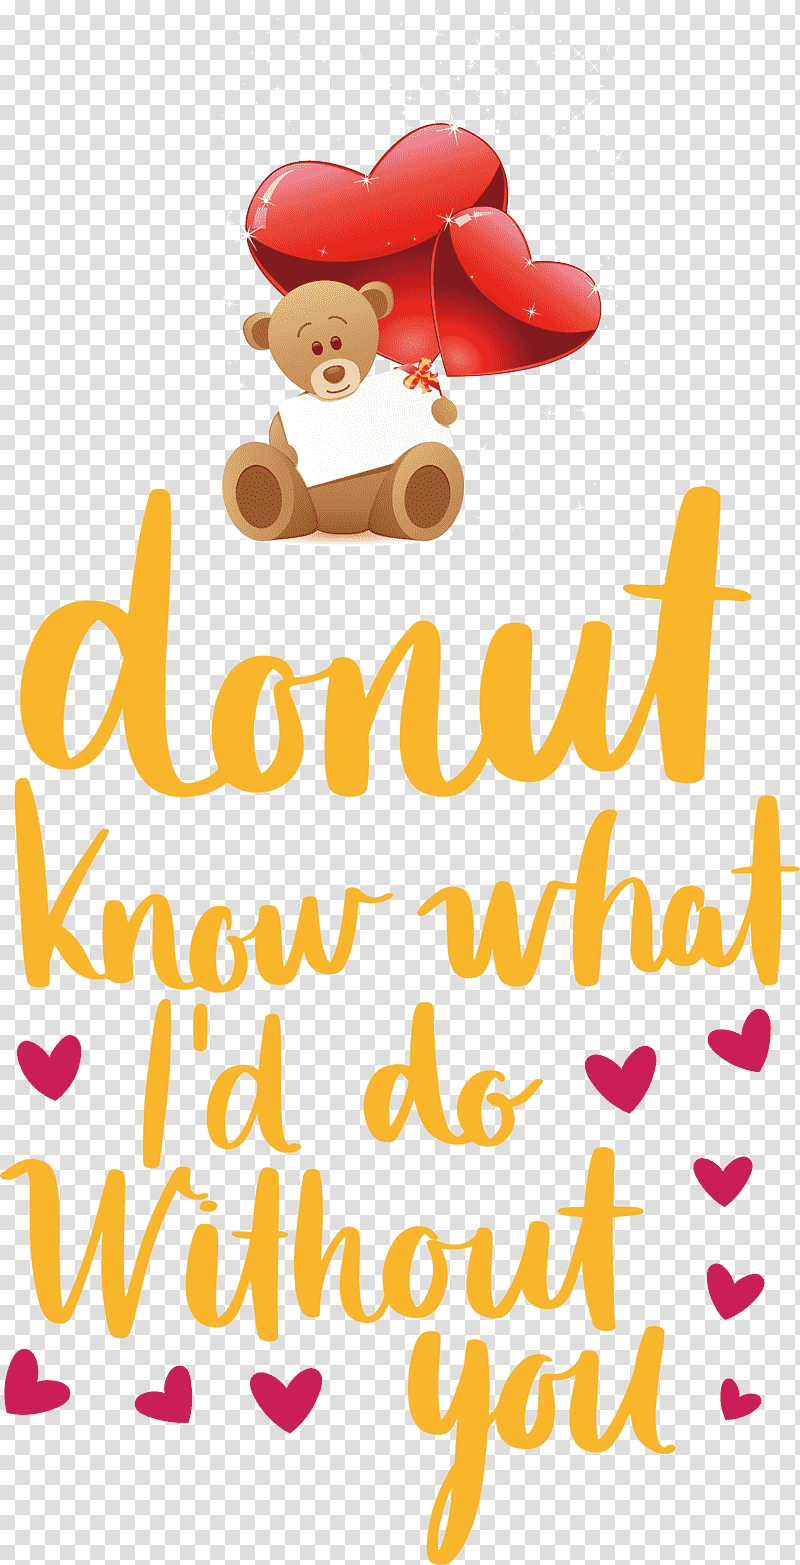 Donut Valentines Day Valentines Day Quote, Cartoon, Line, Happiness, Meter, Teddy Bear, Bears transparent background PNG clipart